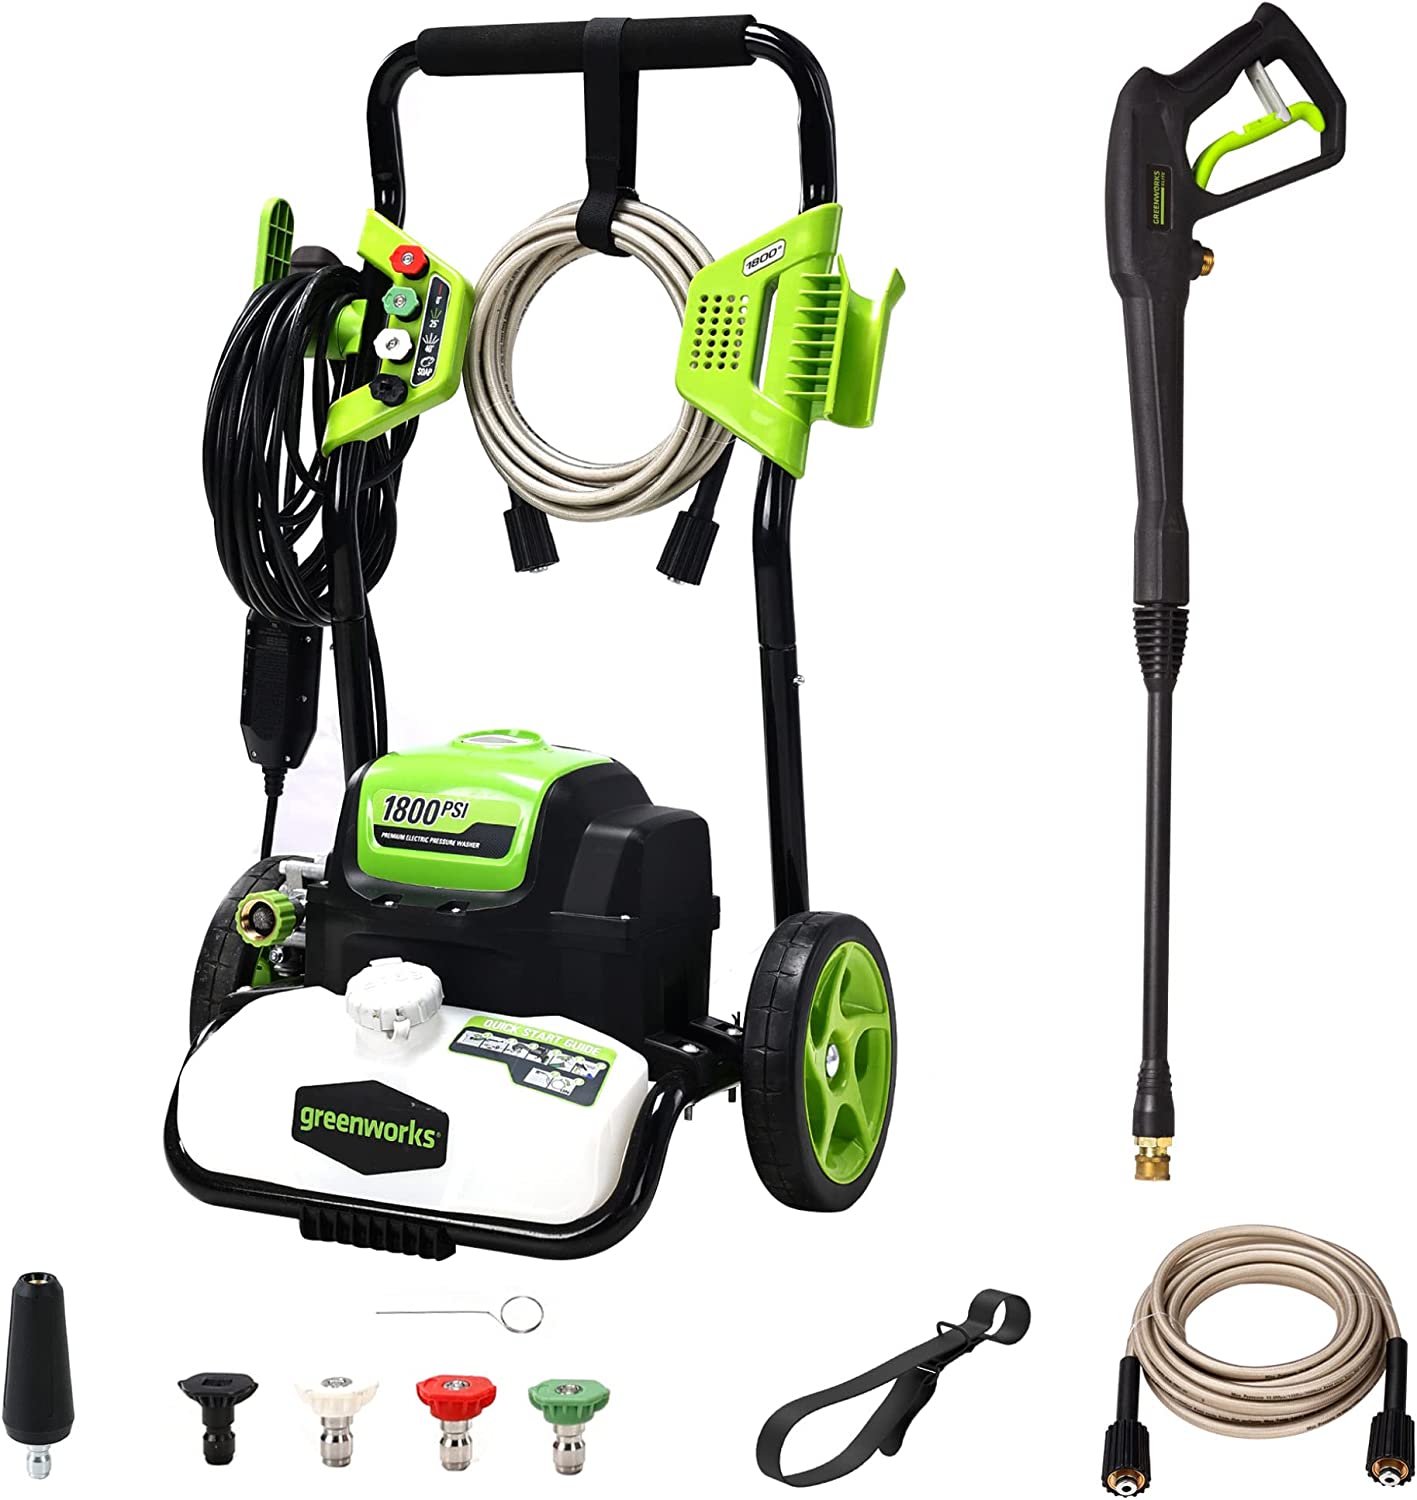 Greenworks 1800 PSI 1.2 GPM Pressure Washer (Open Frame) PWMA Certified *NEW* (8082622775534)